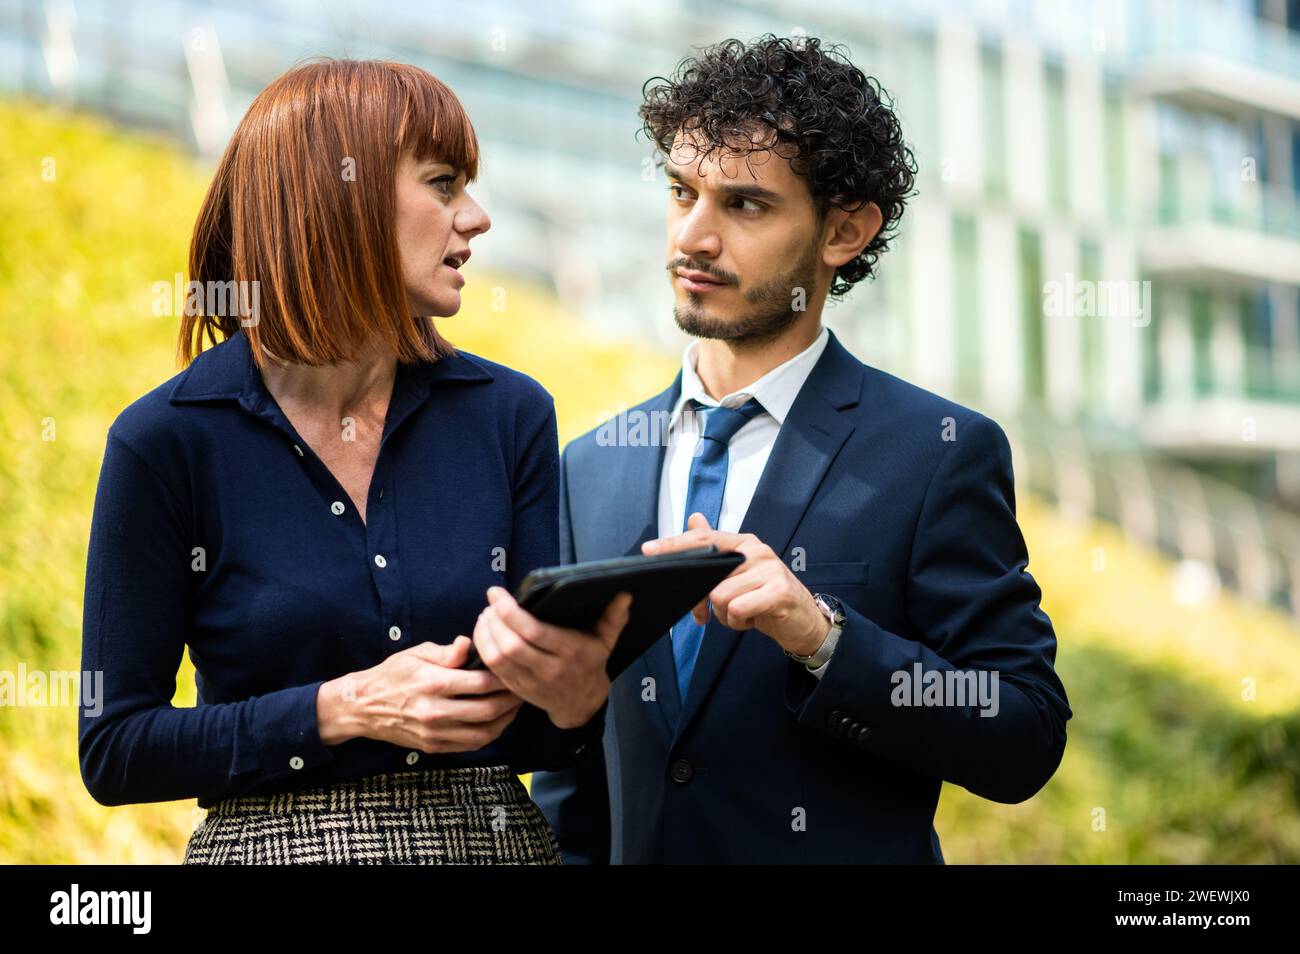 Couple of business people using a tablet outdoor Stock Photo